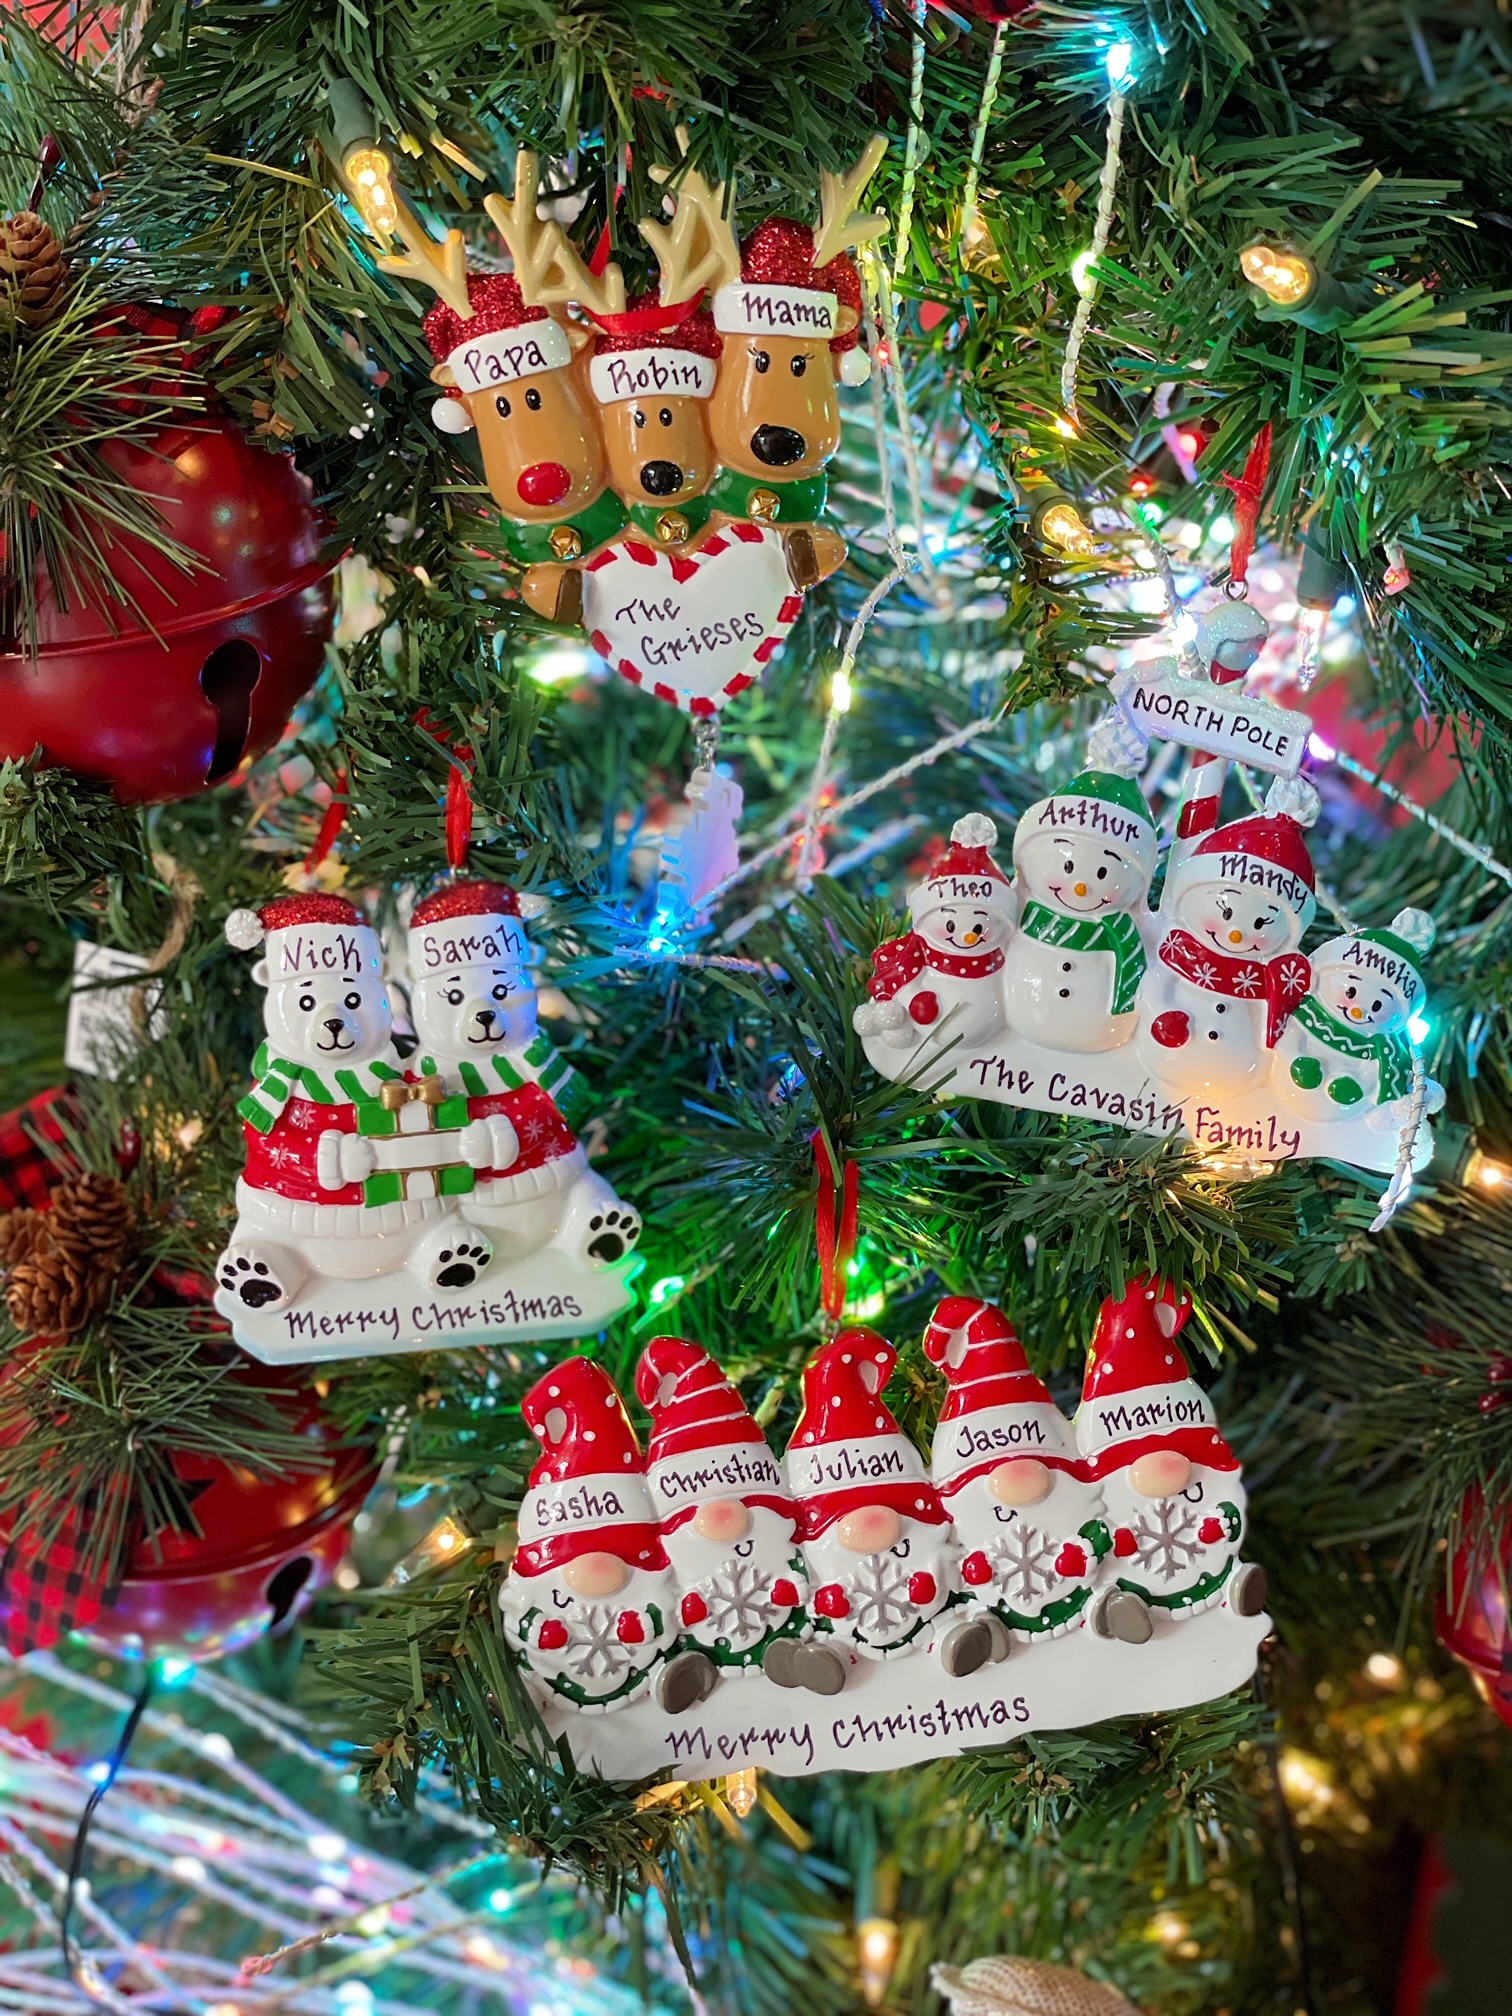 Personalized Ornaments with snowmen, deer and polar bear families